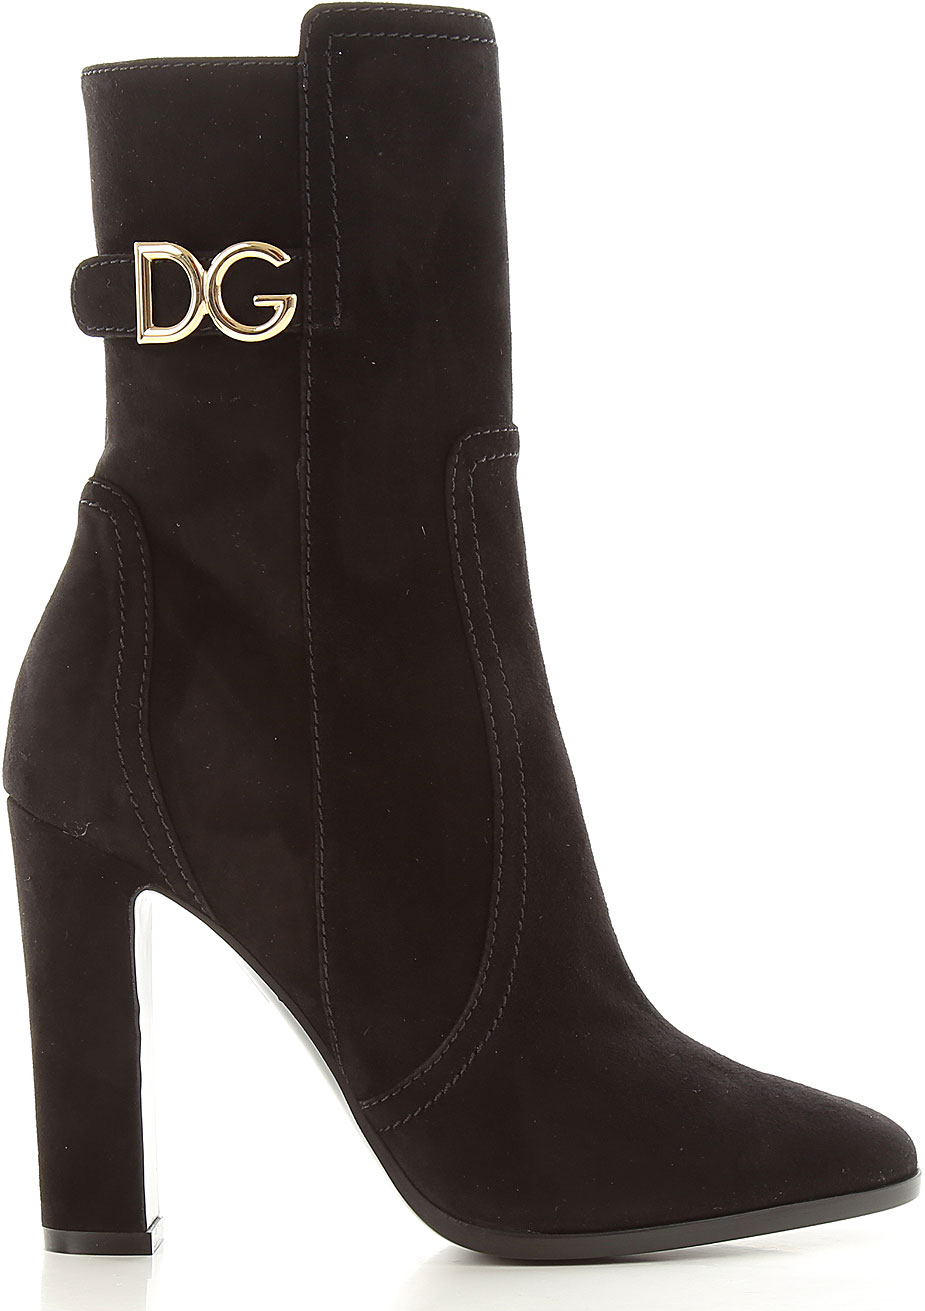 Womens Shoes Dolce & Gabbana, Style code: ct0669-a1275-80999